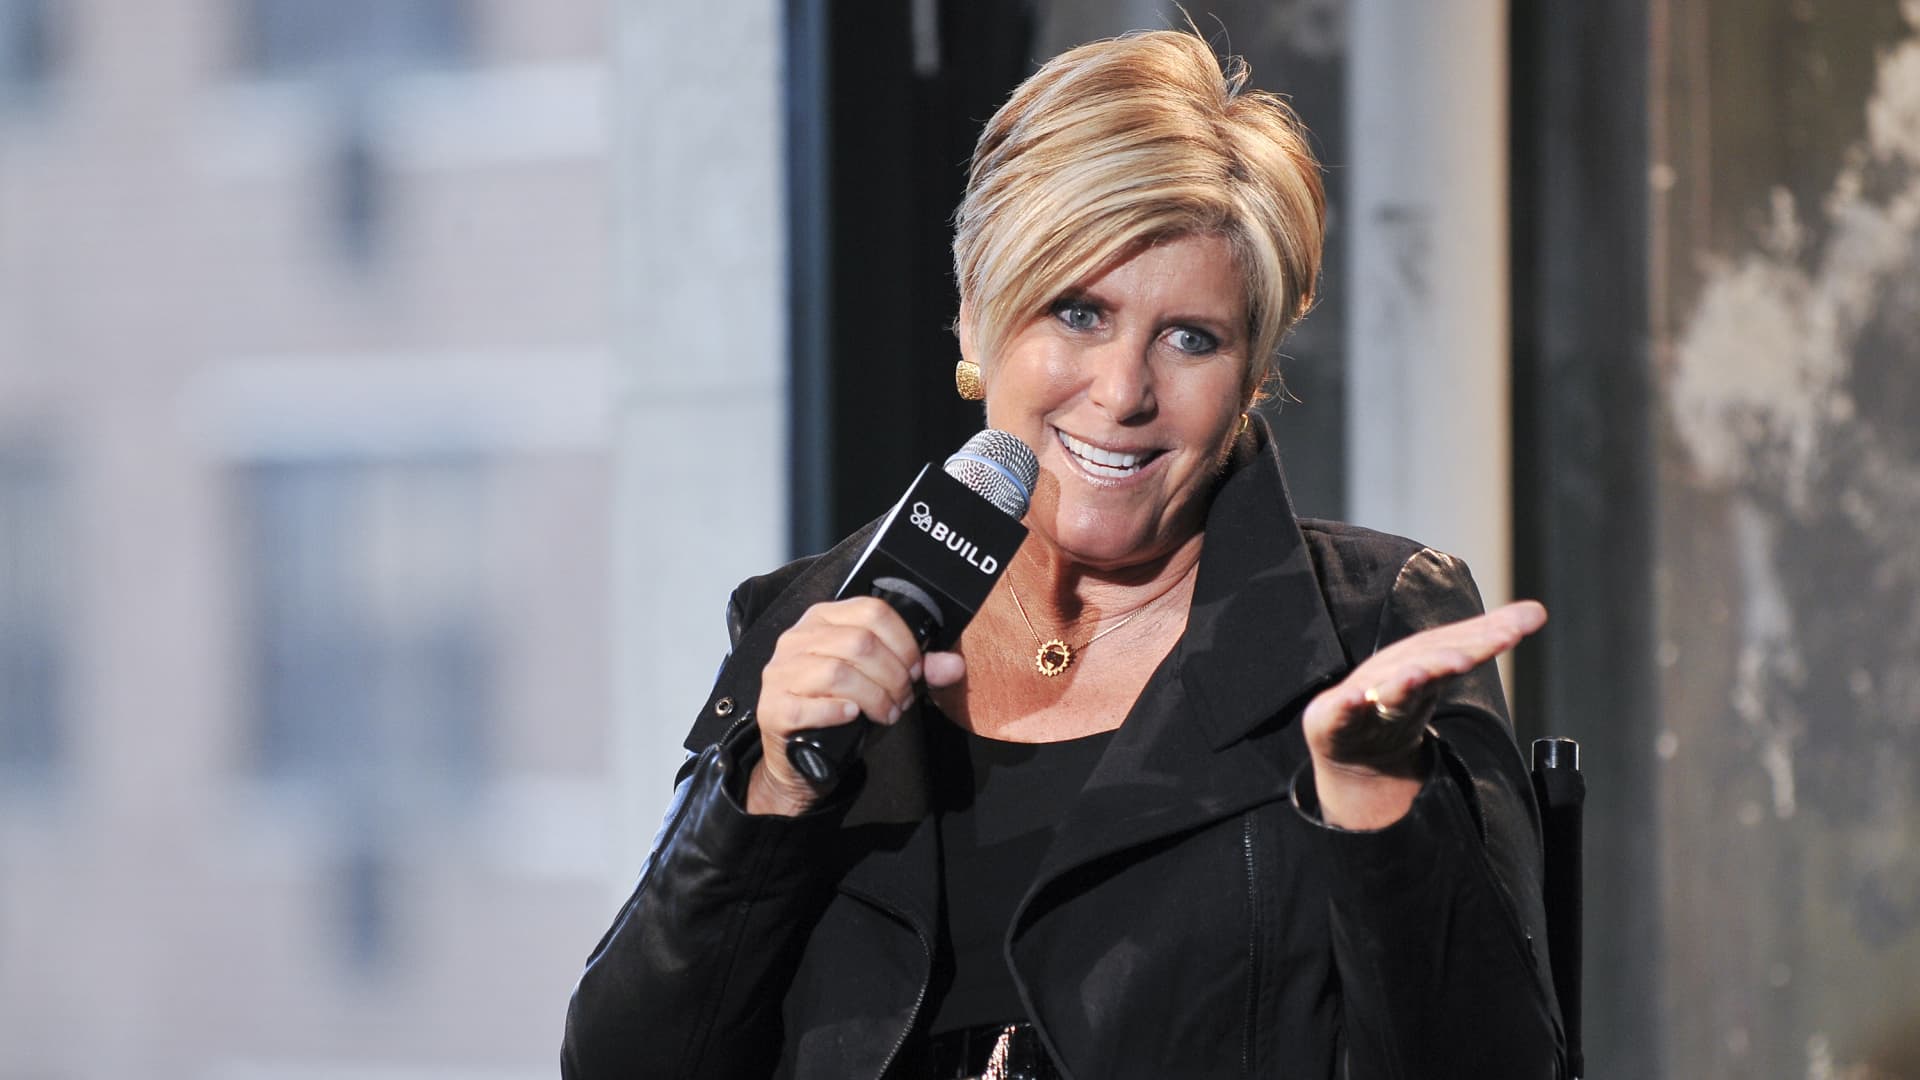 Not having an emergency fund can lead to one of the biggest money mistakes, Suze Orman says. How Congress may help